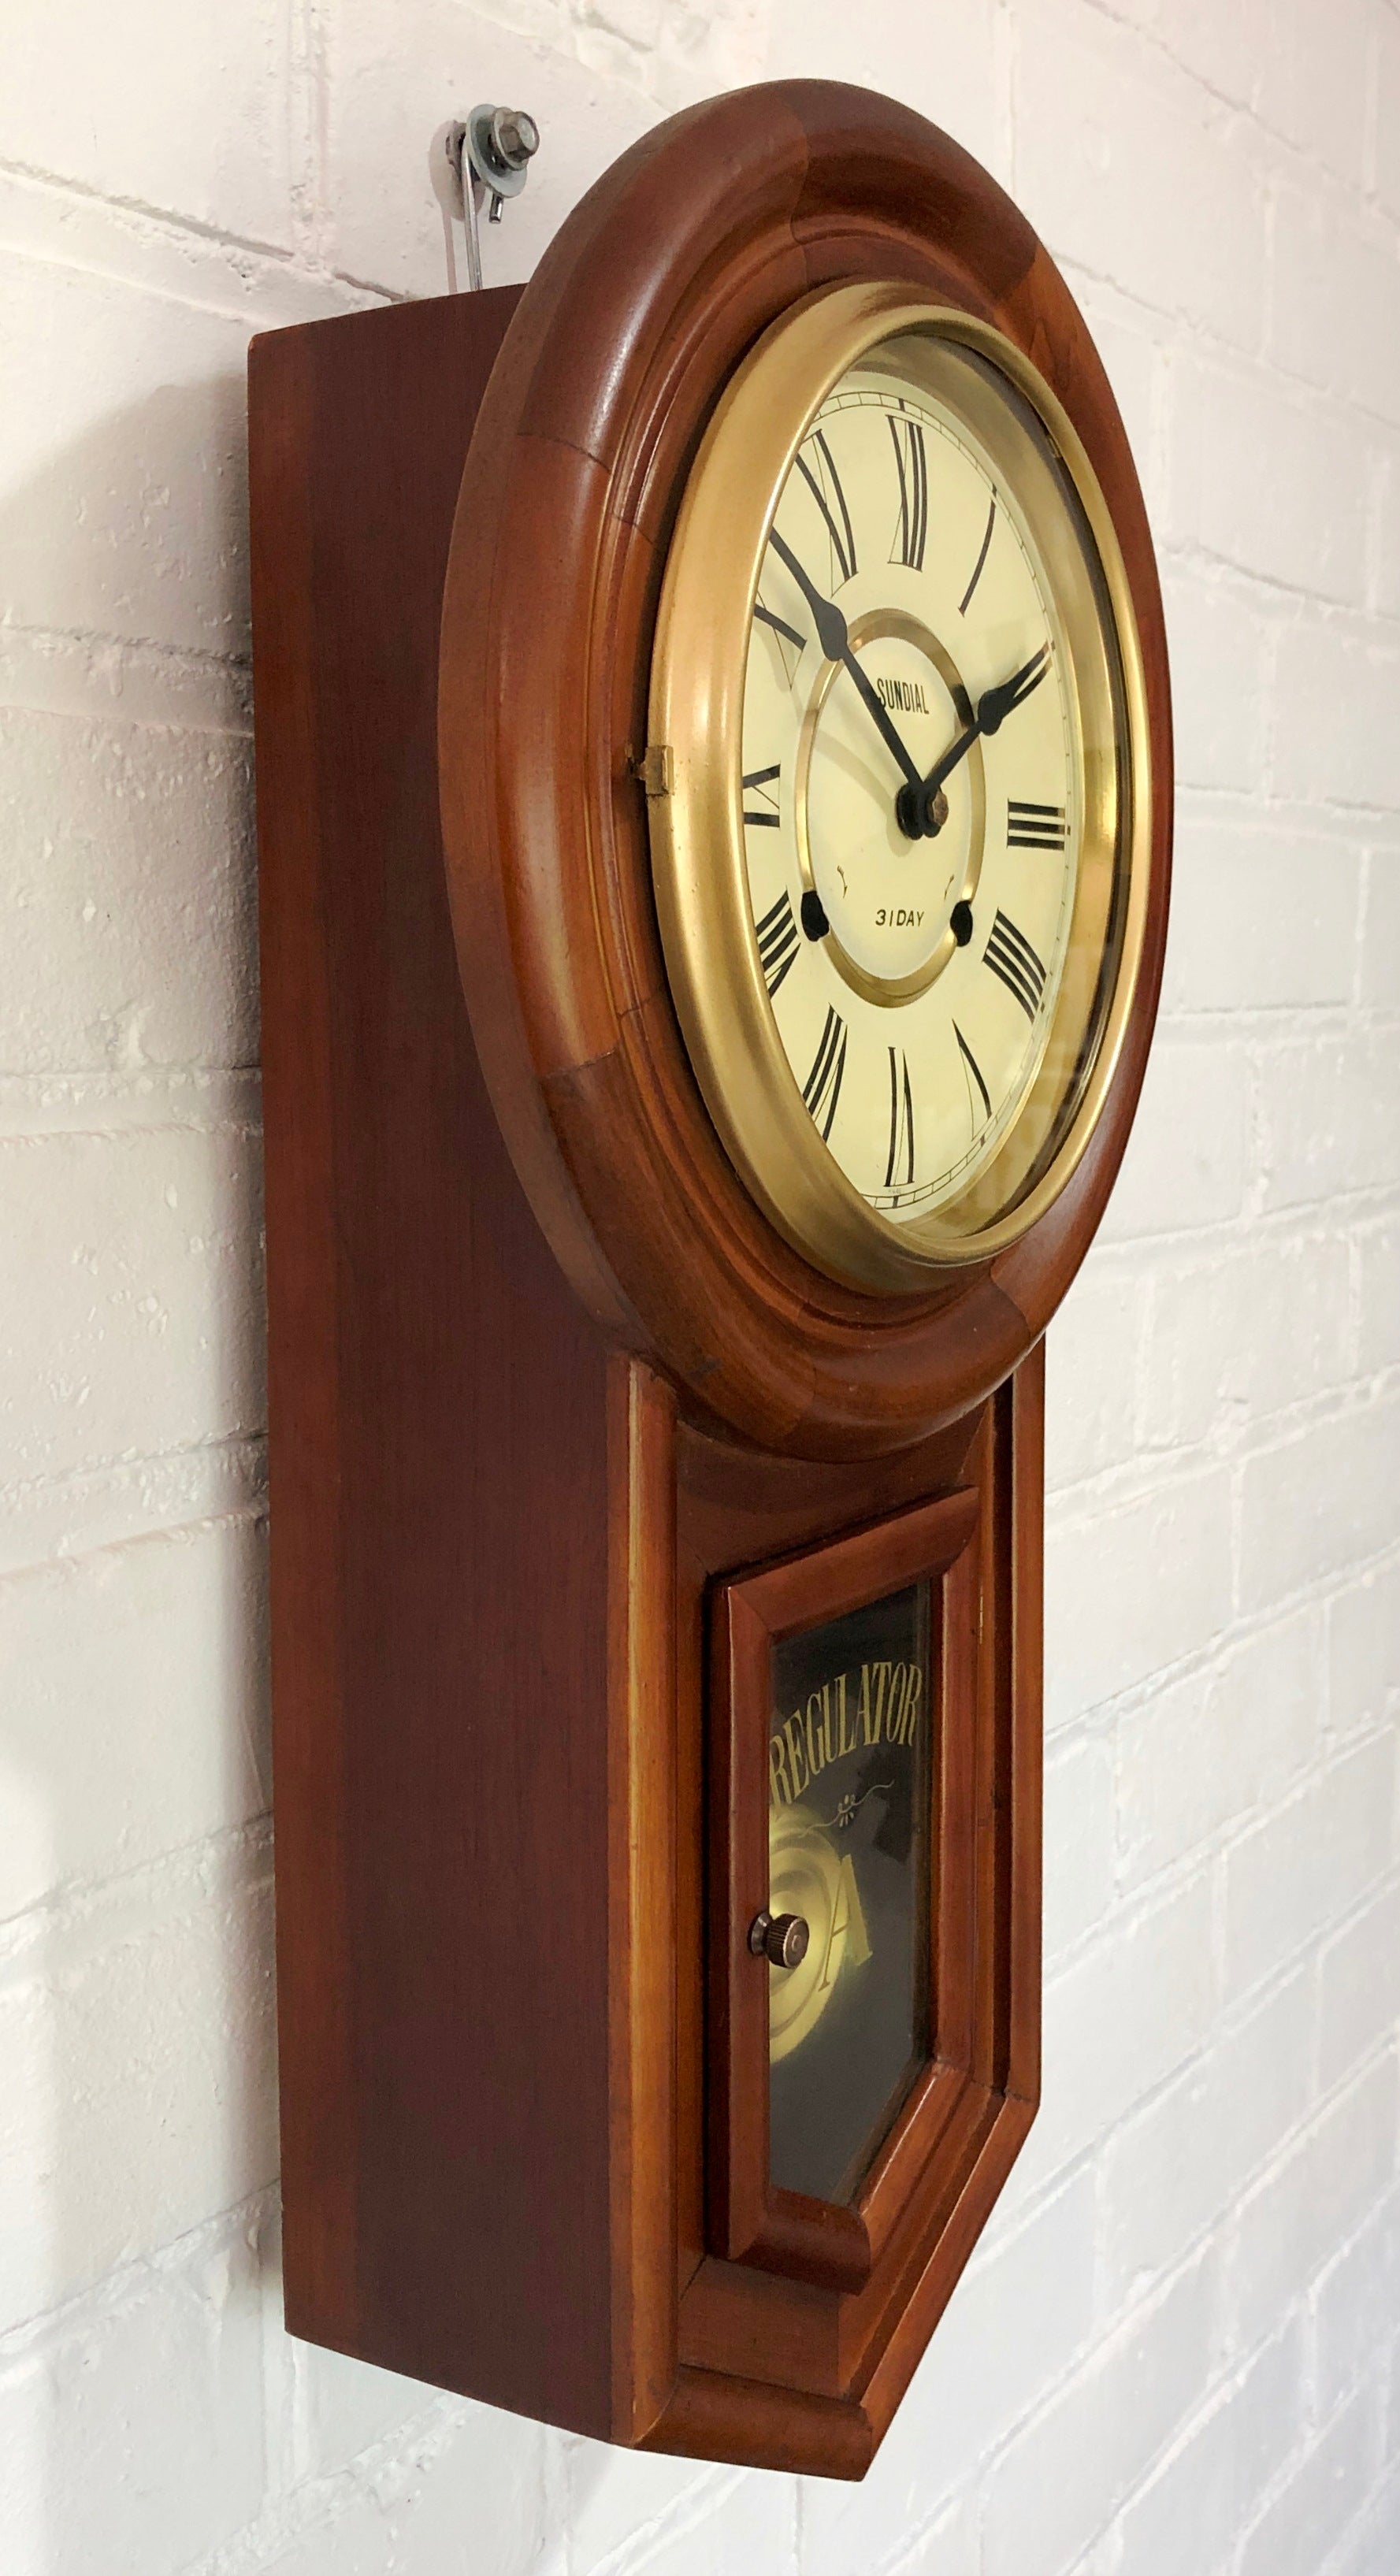 Vintage SUNDIAL Regulator 31 Day Chime Wall Clock | eXibit collection